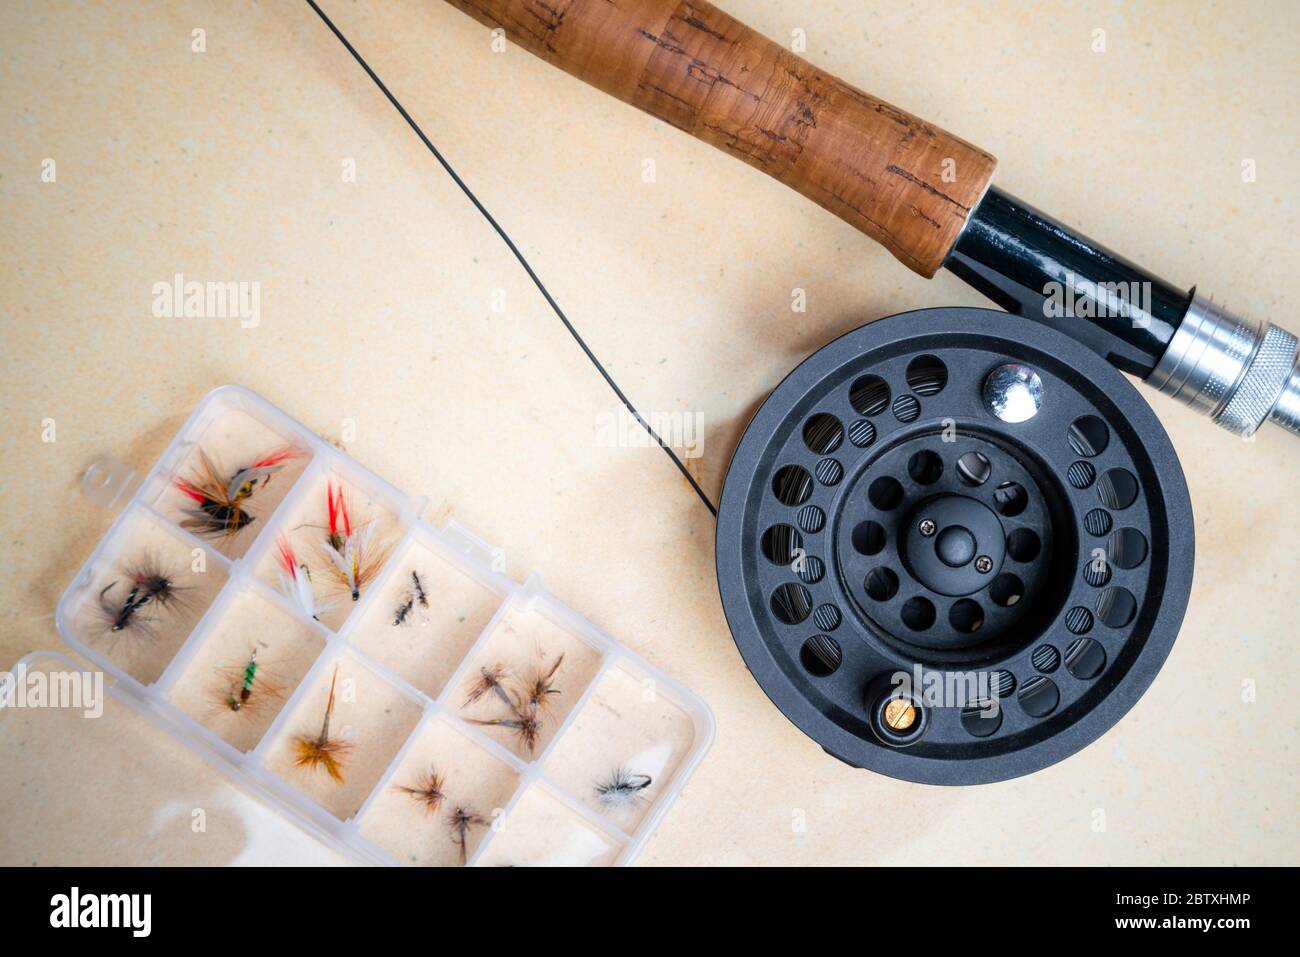 Close up of fly fishing rod with reel next to box with tied flies. Fly fishing equipment still life. Nobody Stock Photo